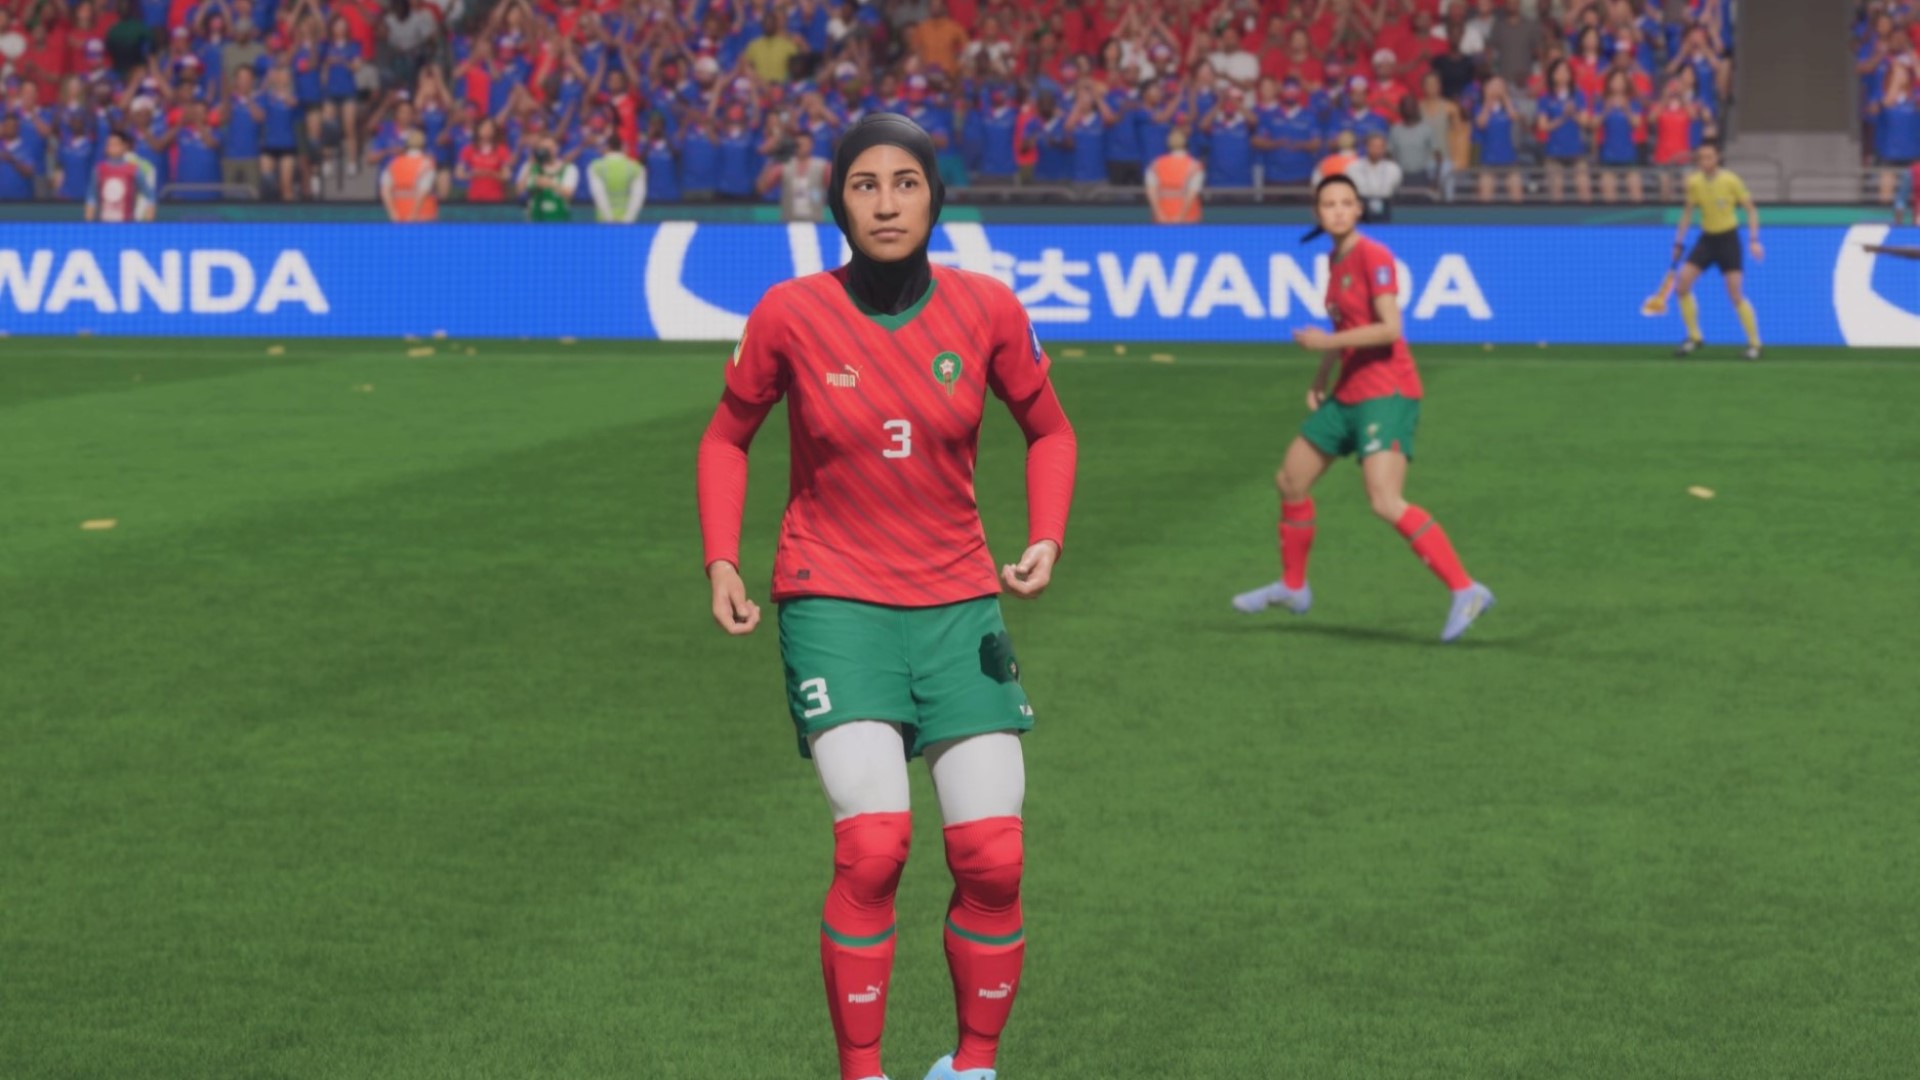 FIFA 23 adds Hijab wearing player in franchise first | TechRadar